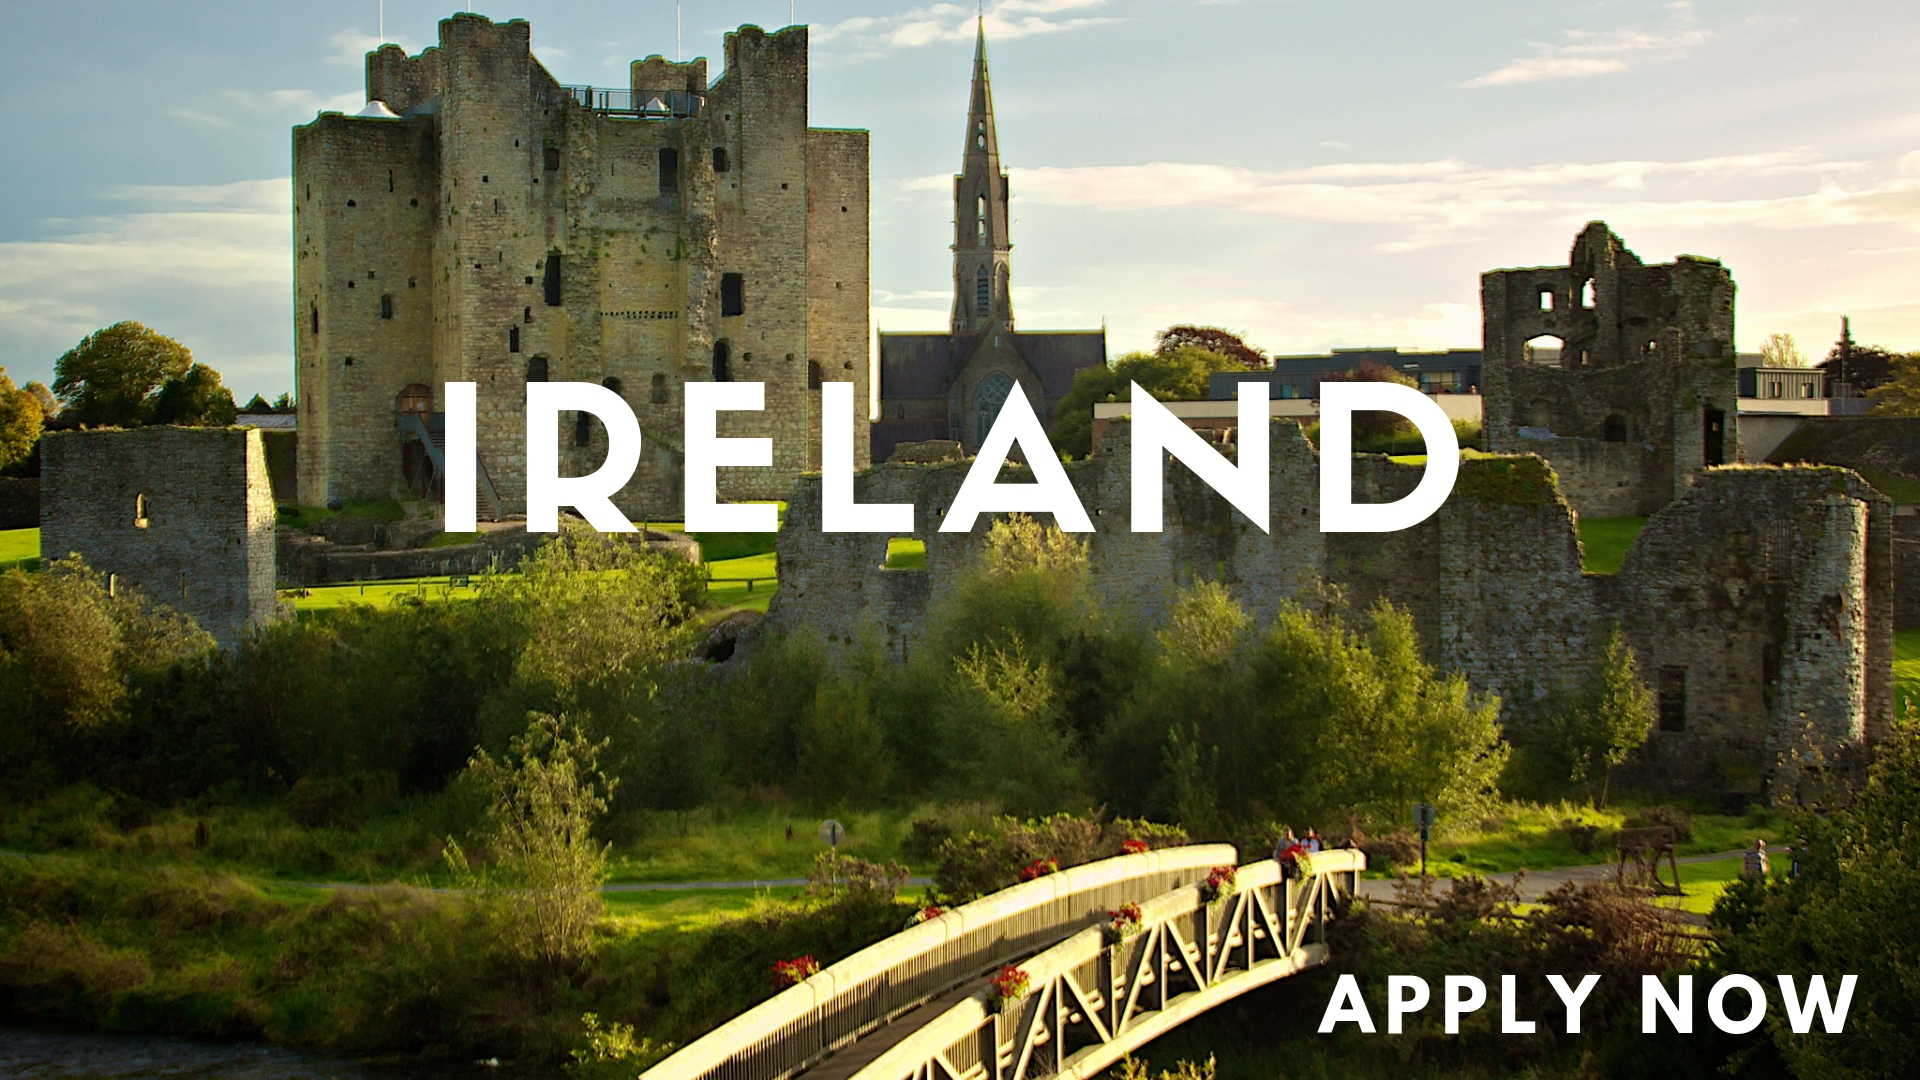 Make Your Gap Year An Experience Visit Ireland With Lattitude Org Uk